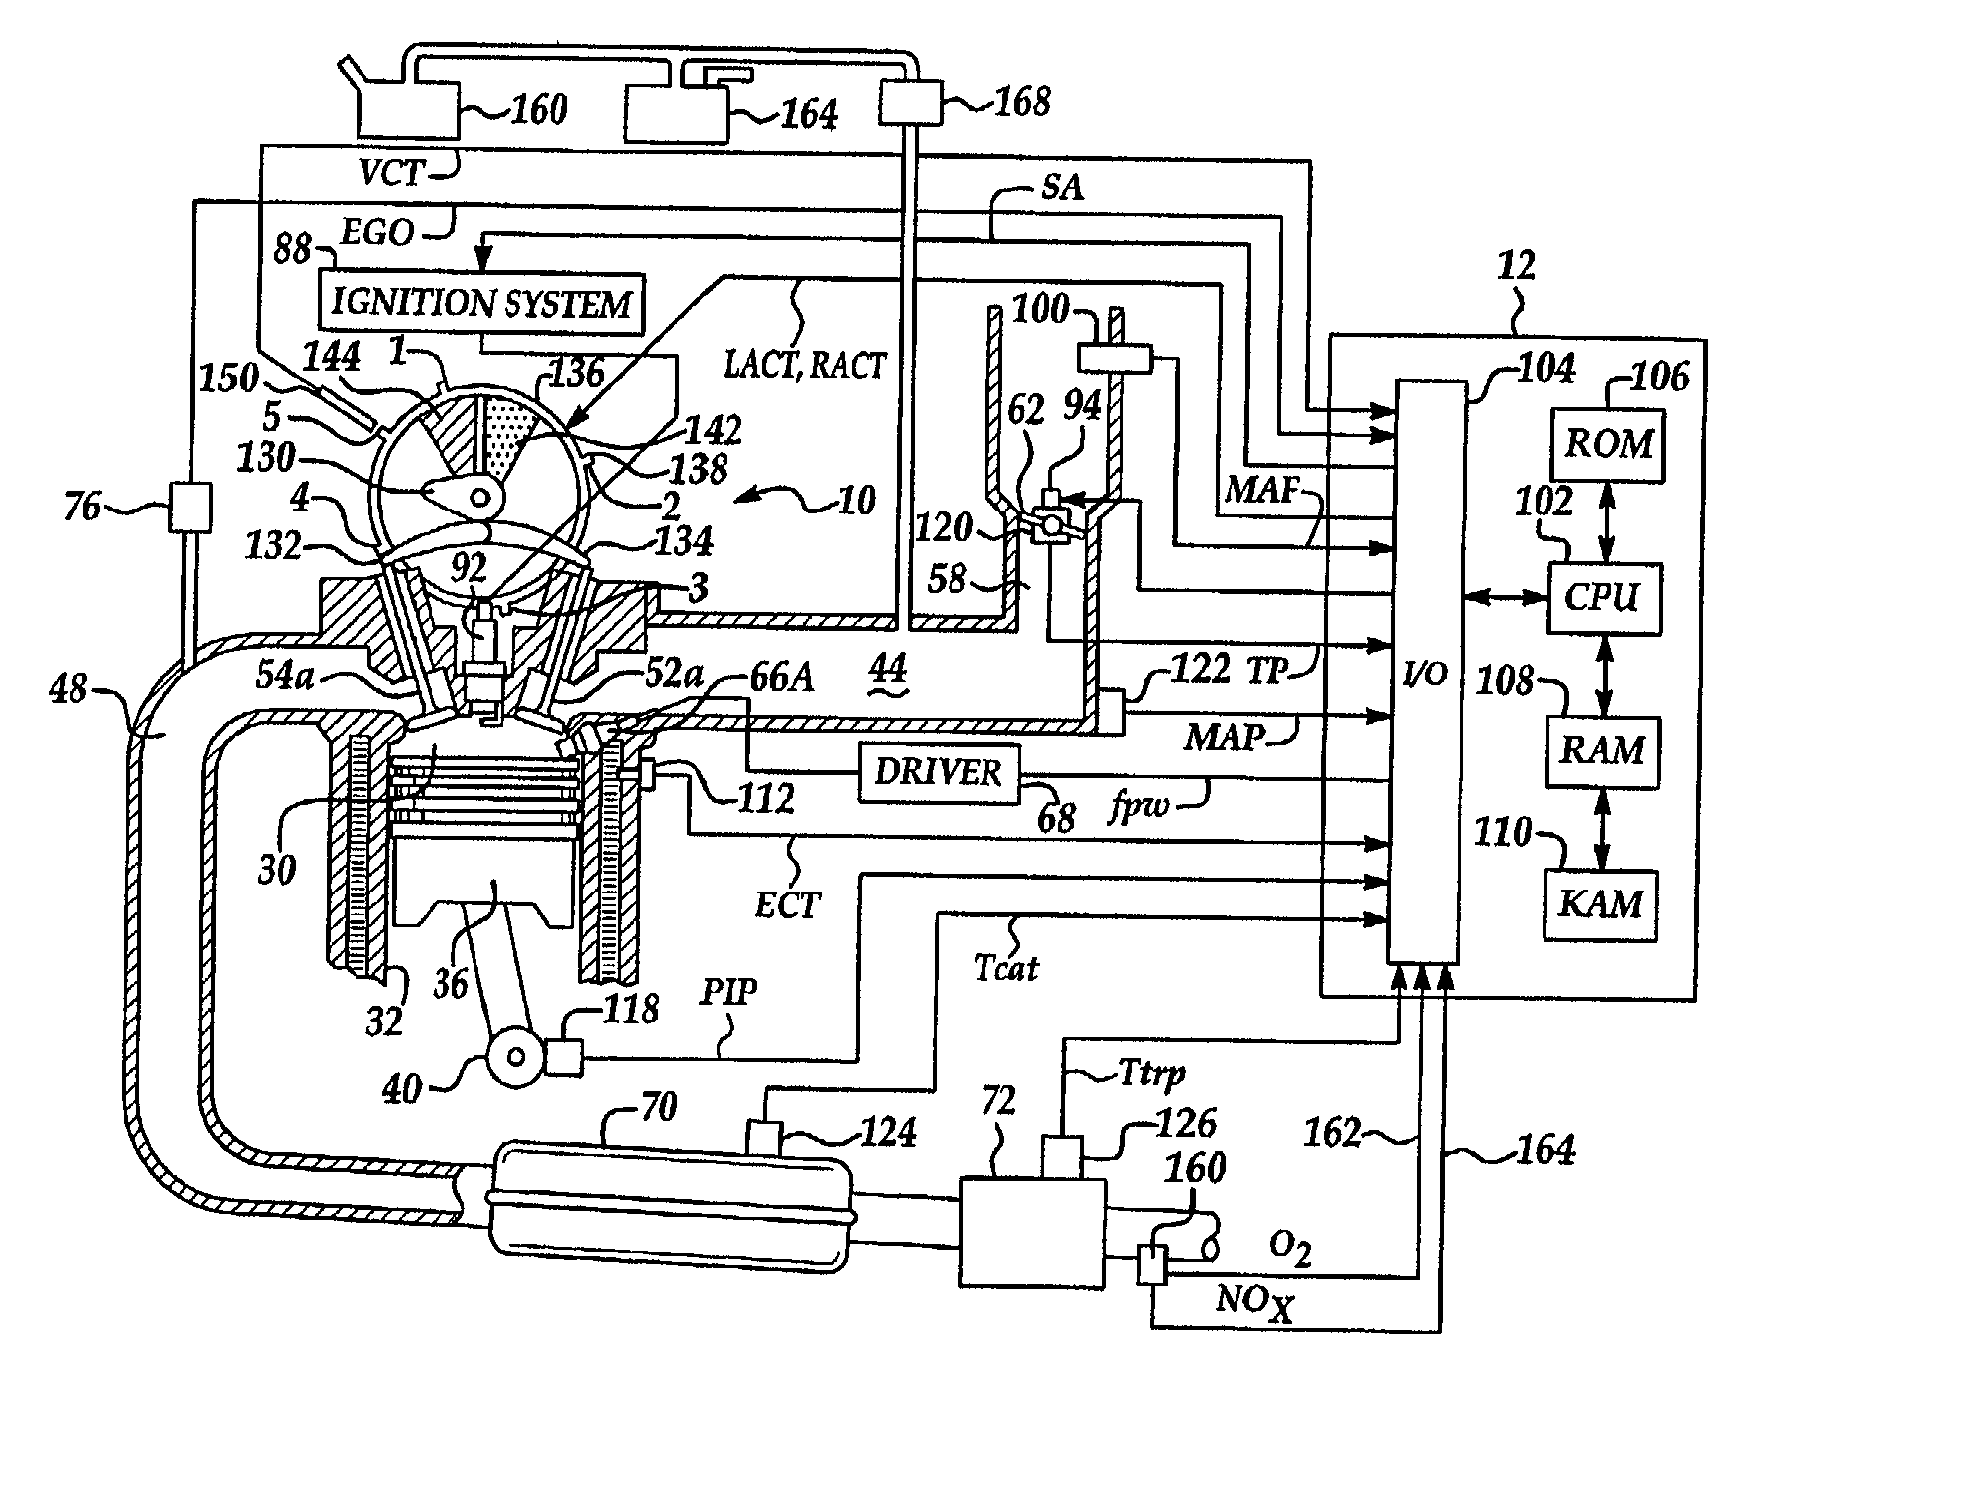 Method for split ignition timing for idle speed control of an engine